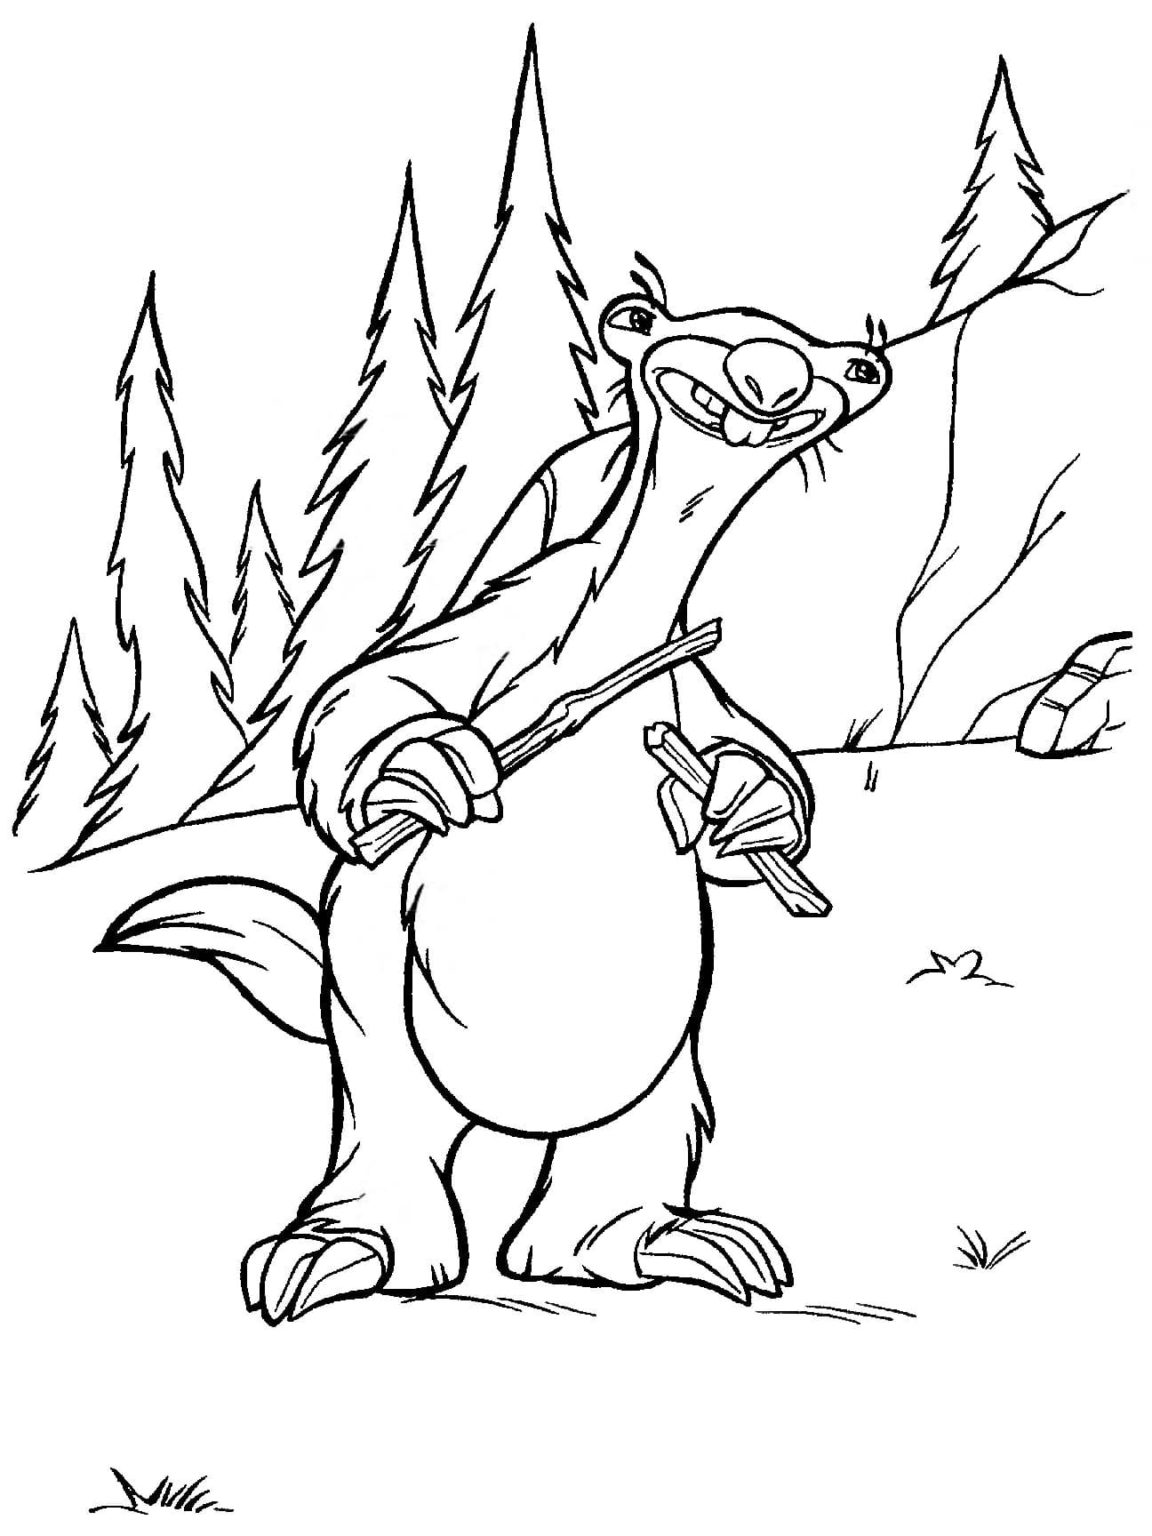 Ice Age Coloring Pages | 90 Printable Coloring Pages